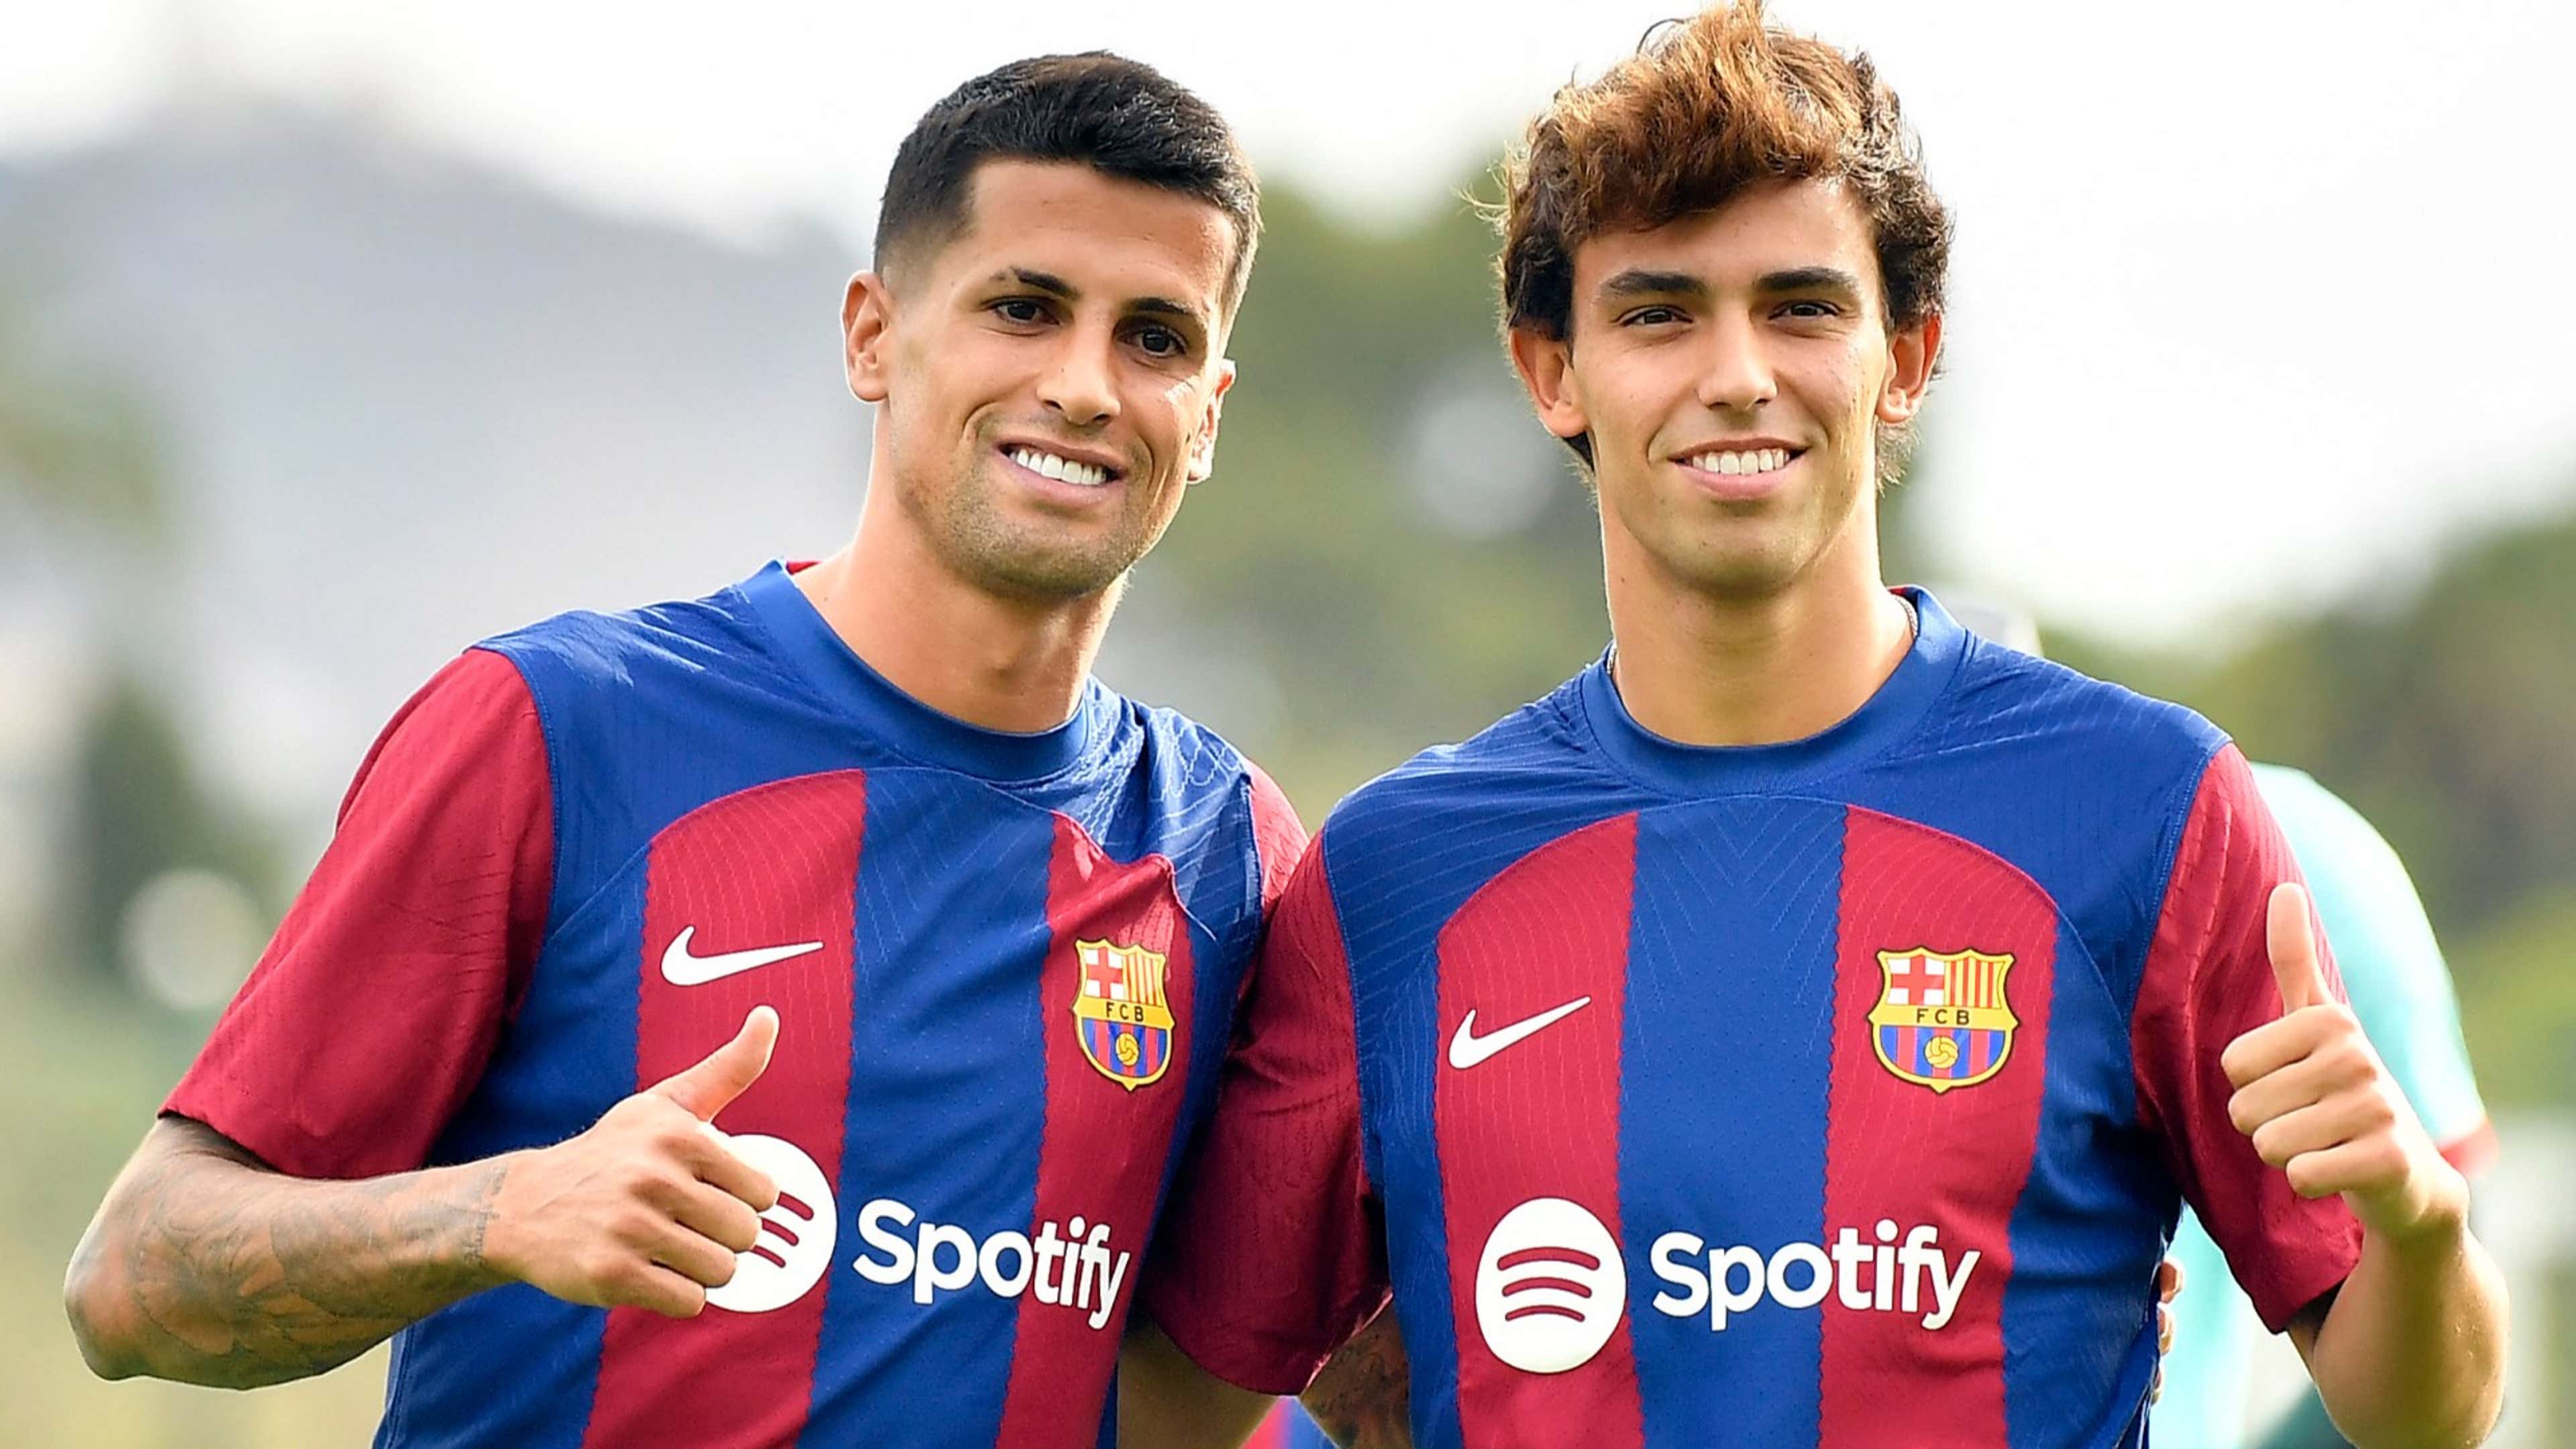 Joao Felix & Joao Cancelo challenged to earn permanent Barcelona transfers  as Deco addresses whether summer signings took pay cuts to leave Atletico  Madrid and Man City | Goal.com India